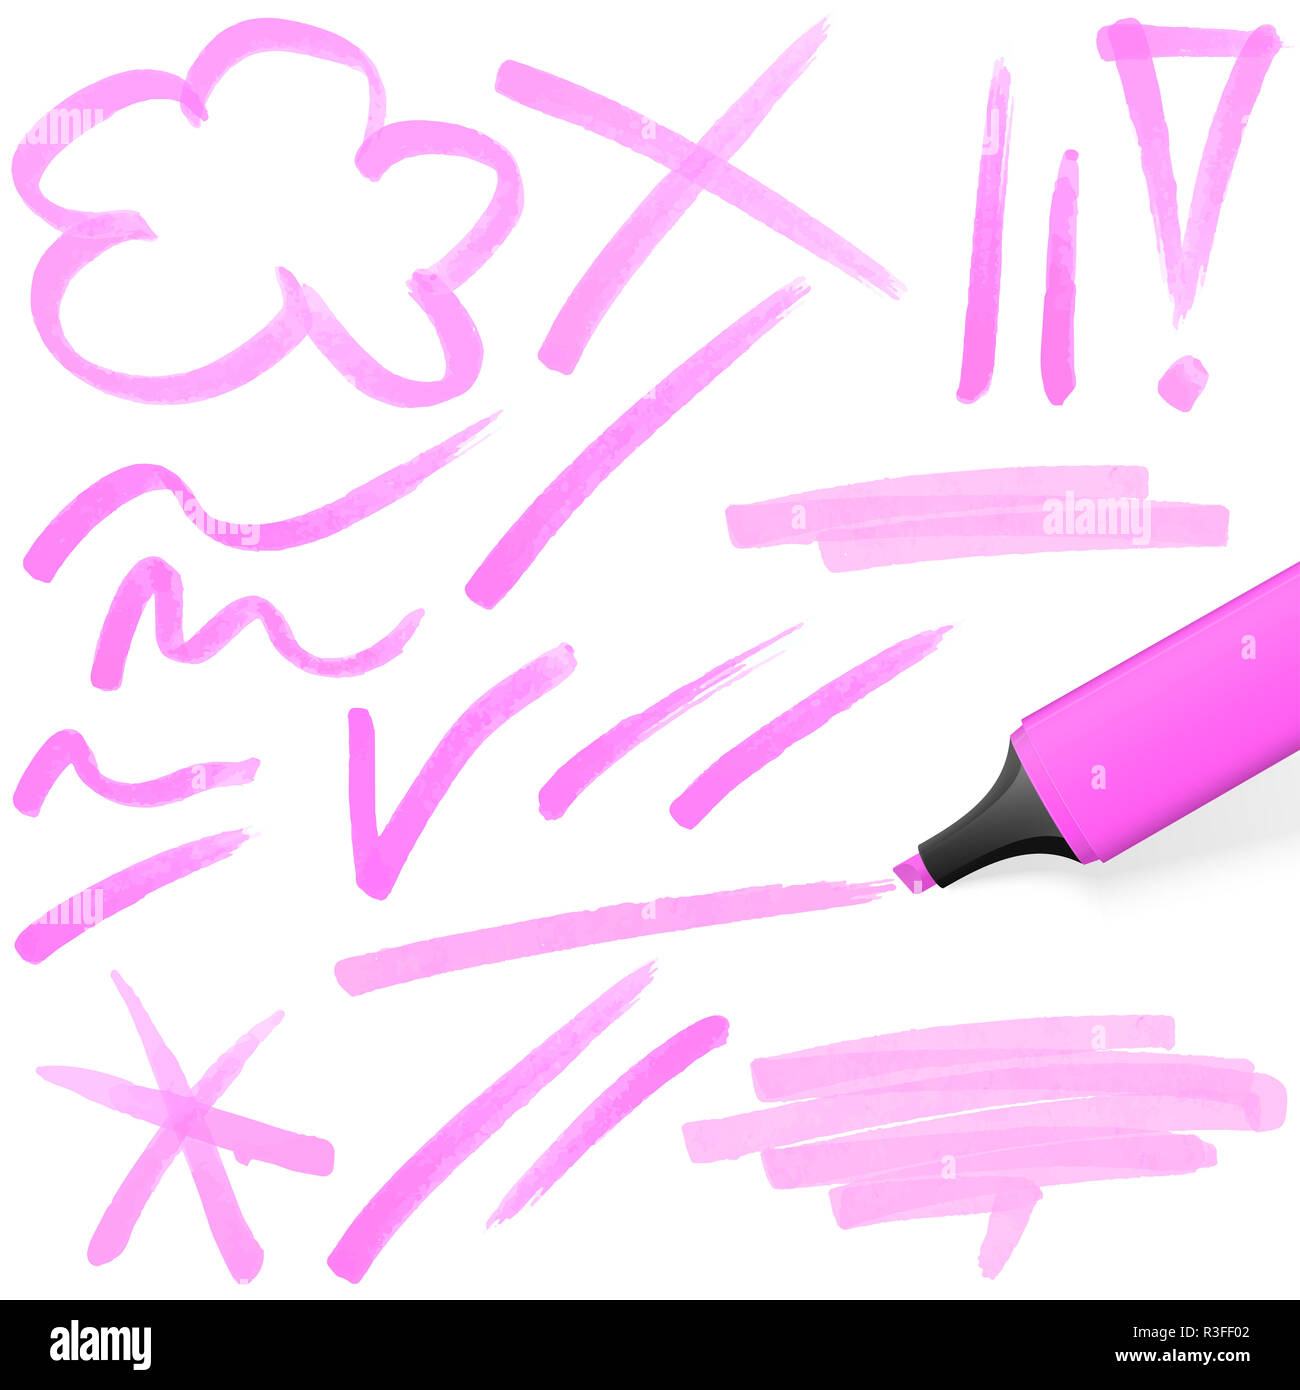 colored highlighter with markings Stock Photo